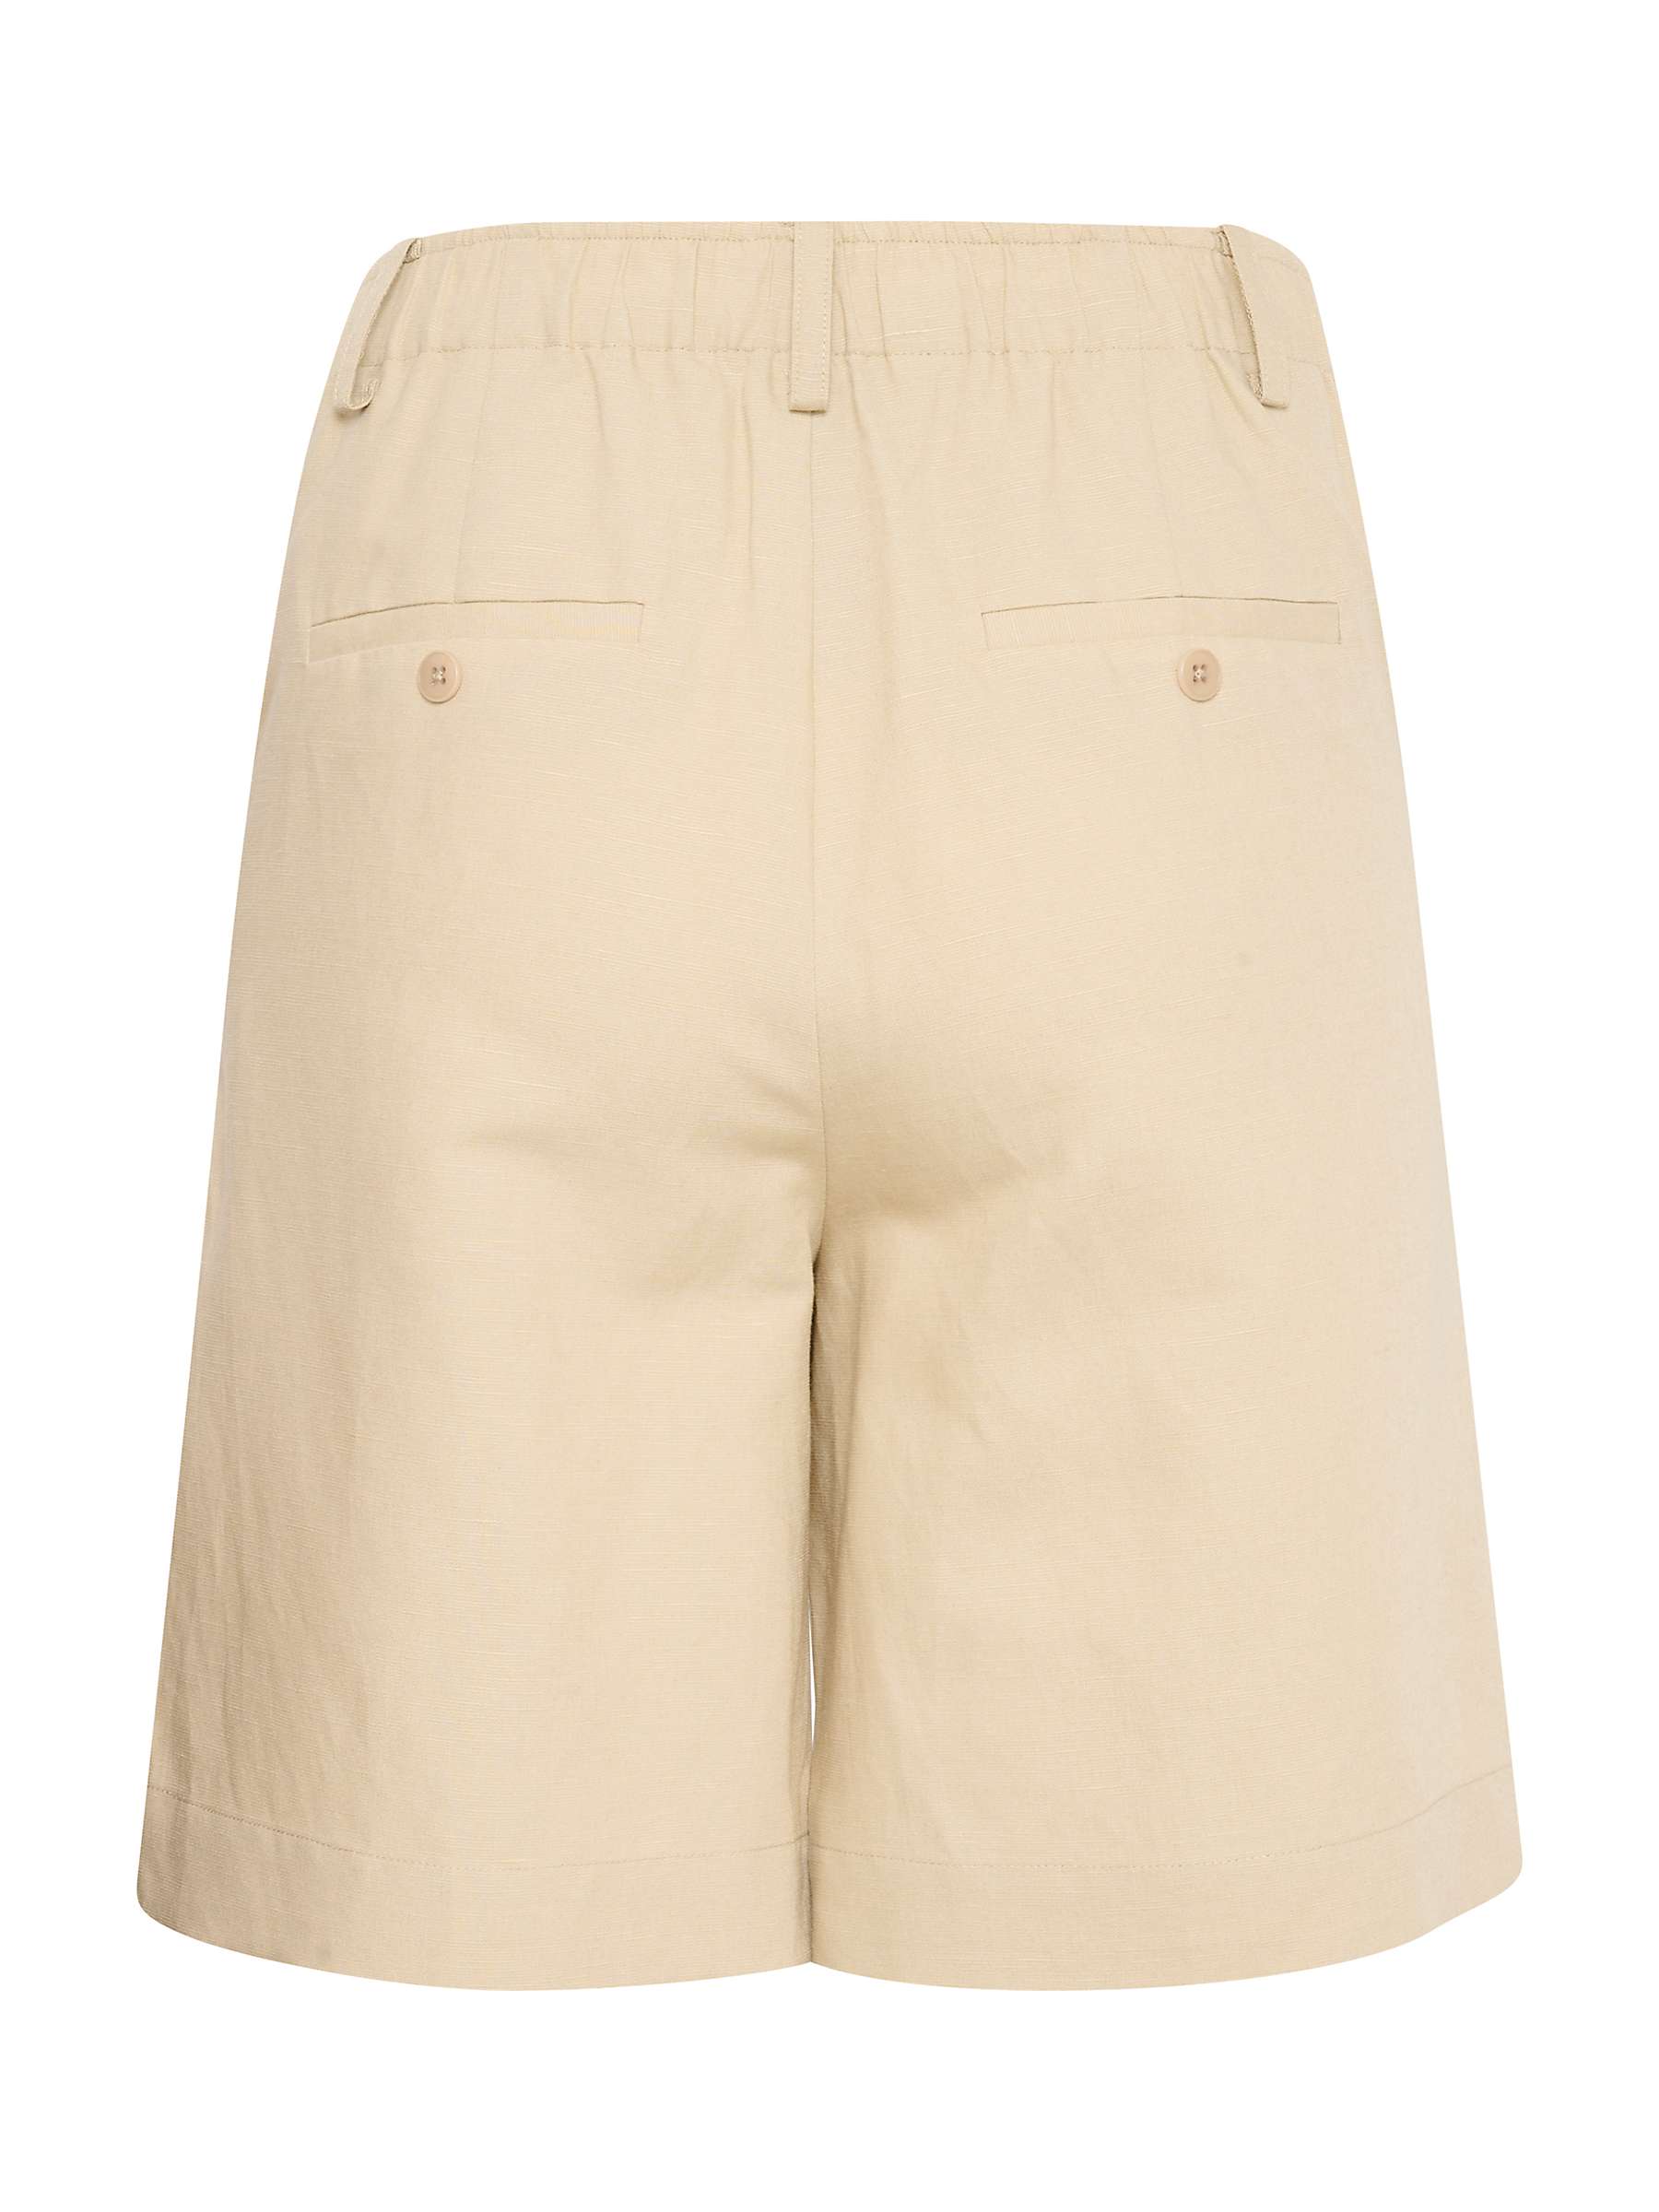 Buy Part Two Gentina High Waisted Shorts, White Pepper Online at johnlewis.com